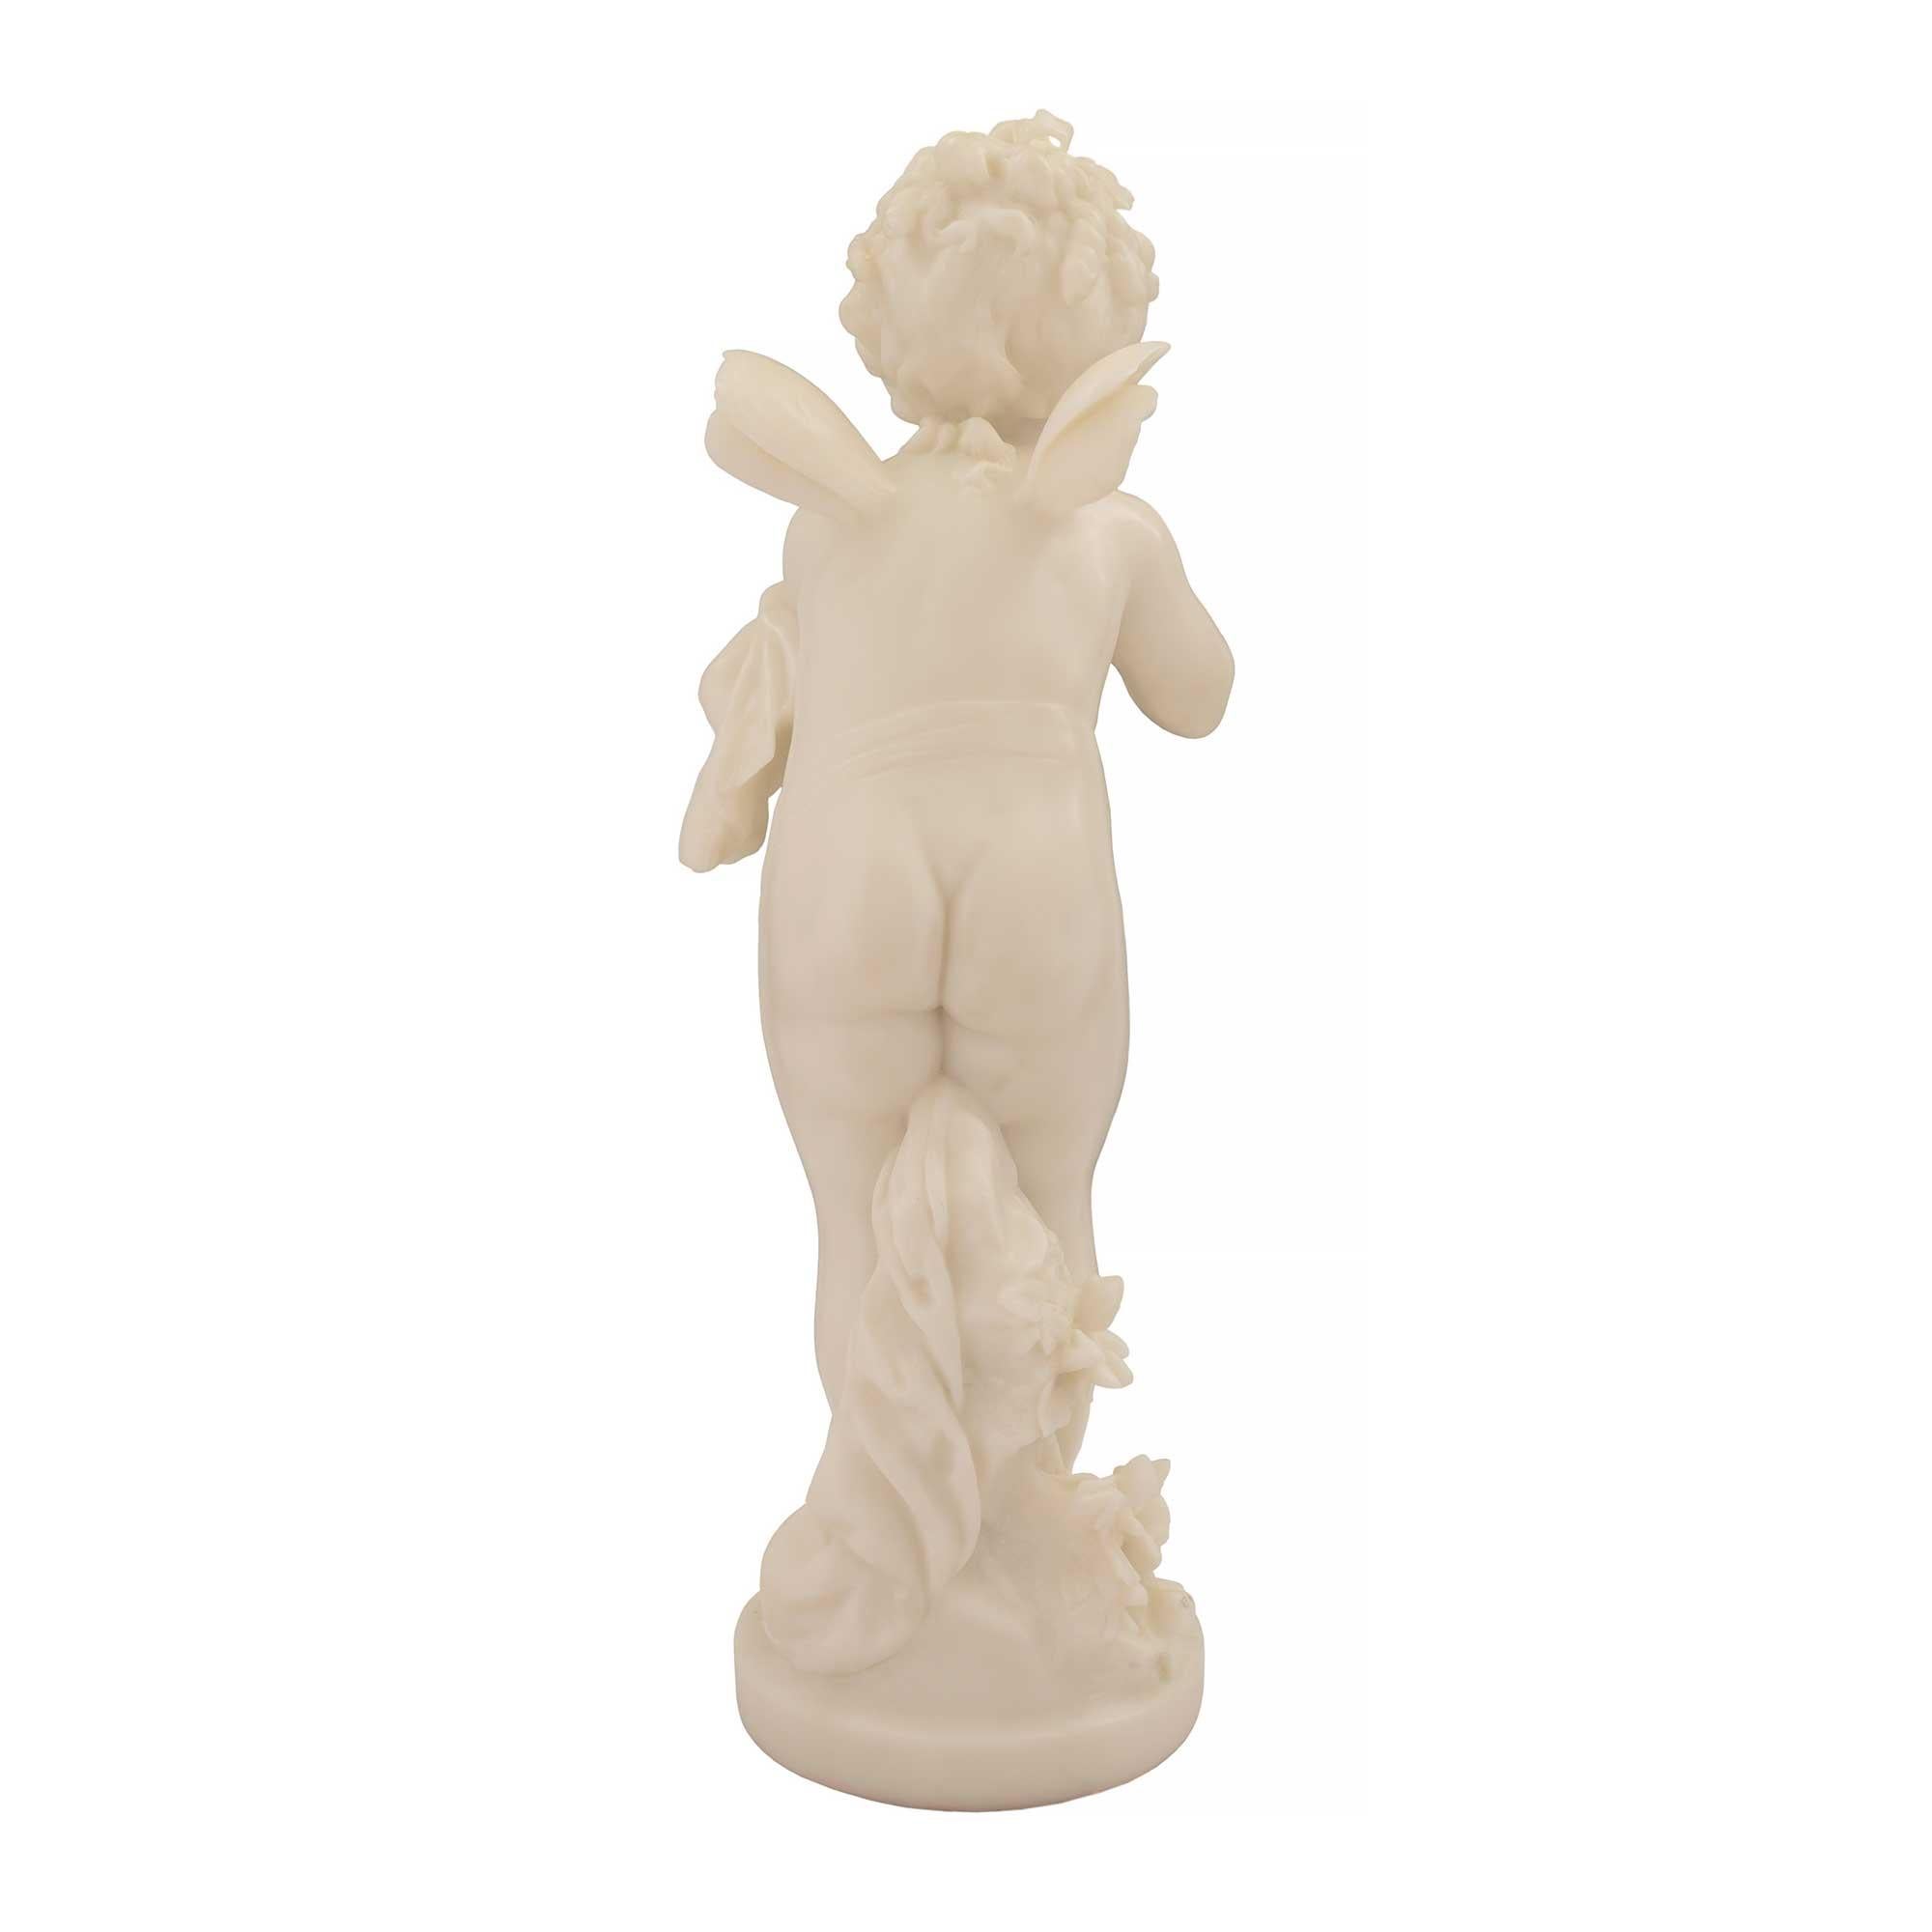 Italian Mid-19th Century White Carrara Marble Statue of Winged Girl For Sale 1